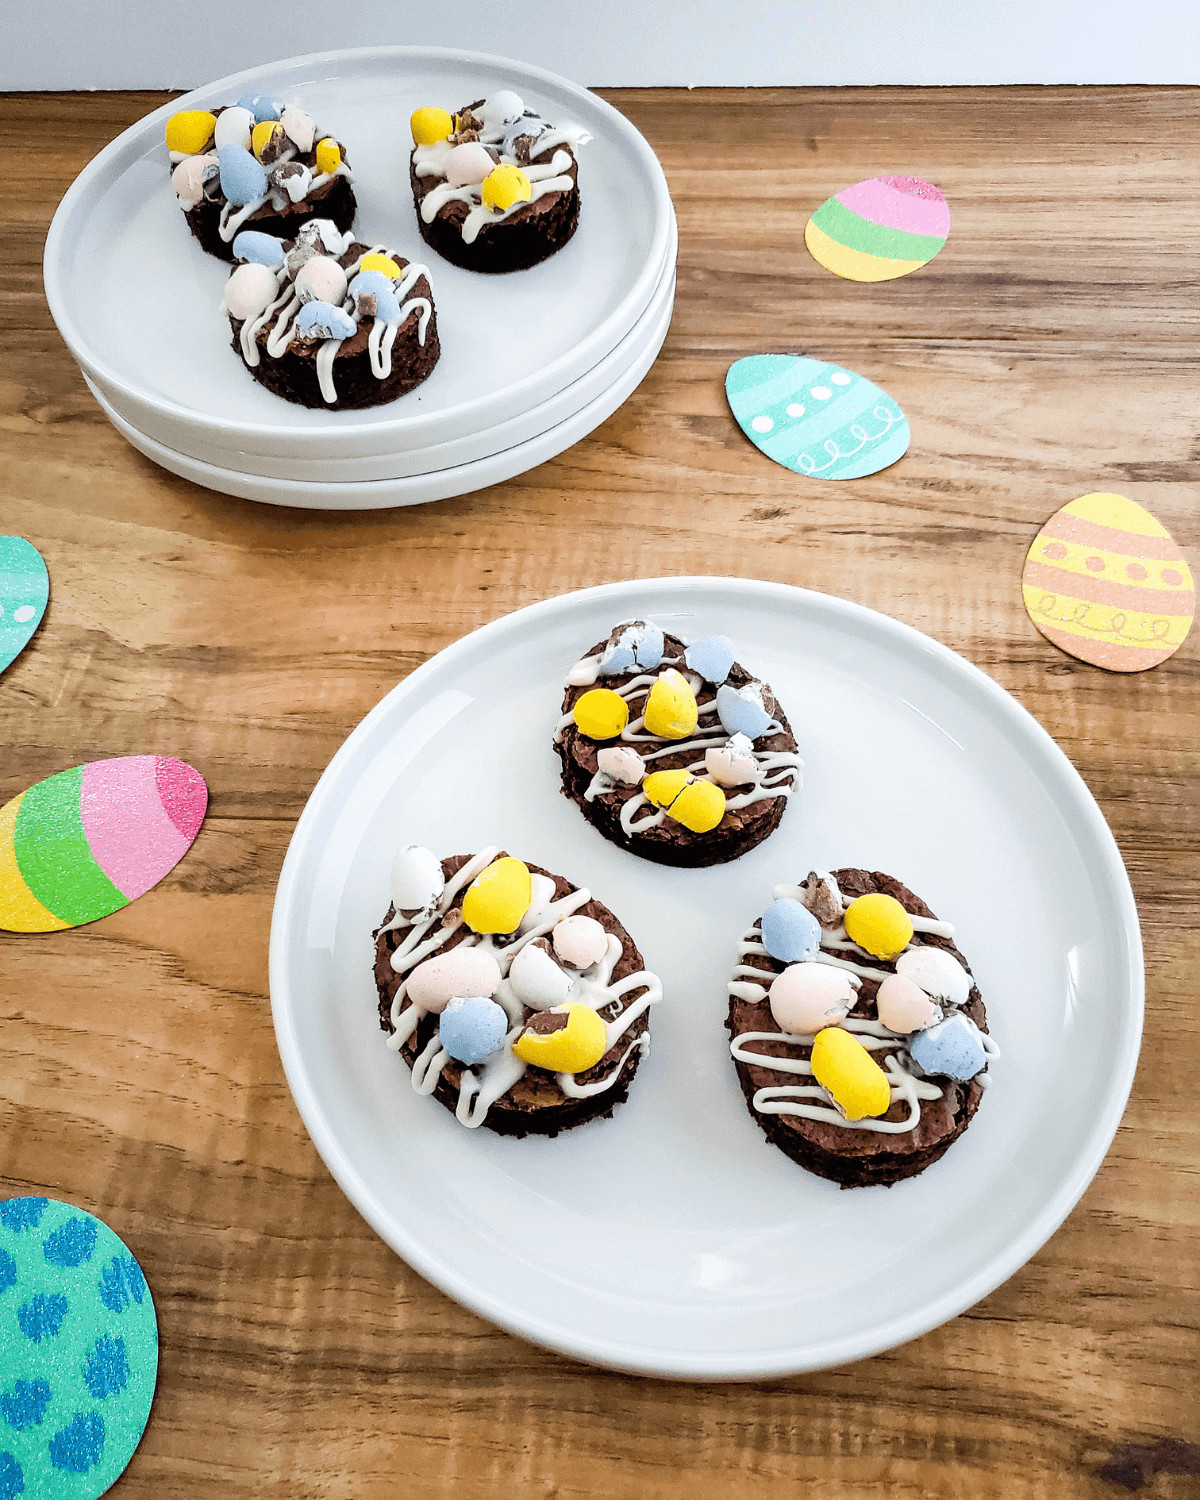 A dessert with candy eggs and drizzled icing on a wooden table with Easter-themed paper plates.